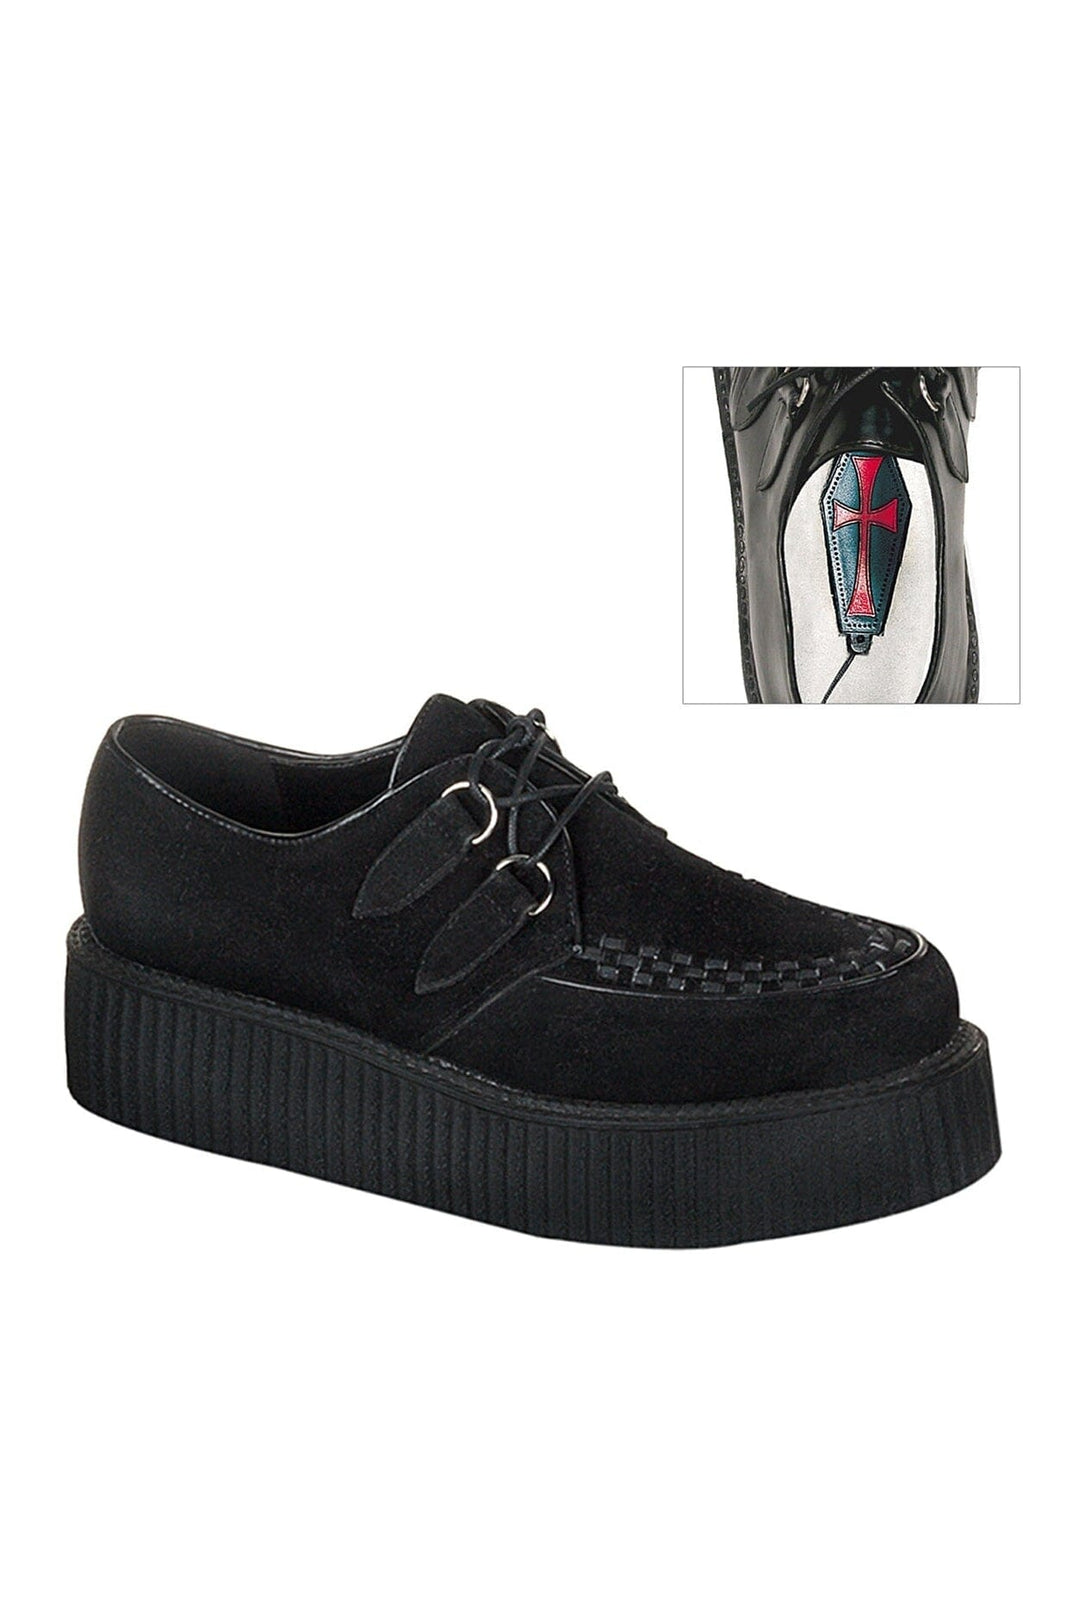 CREEPER-402S Black Suede Leather Creeper-Creepers-Demonia-Black-10-Suede Leather-SEXYSHOES.COM